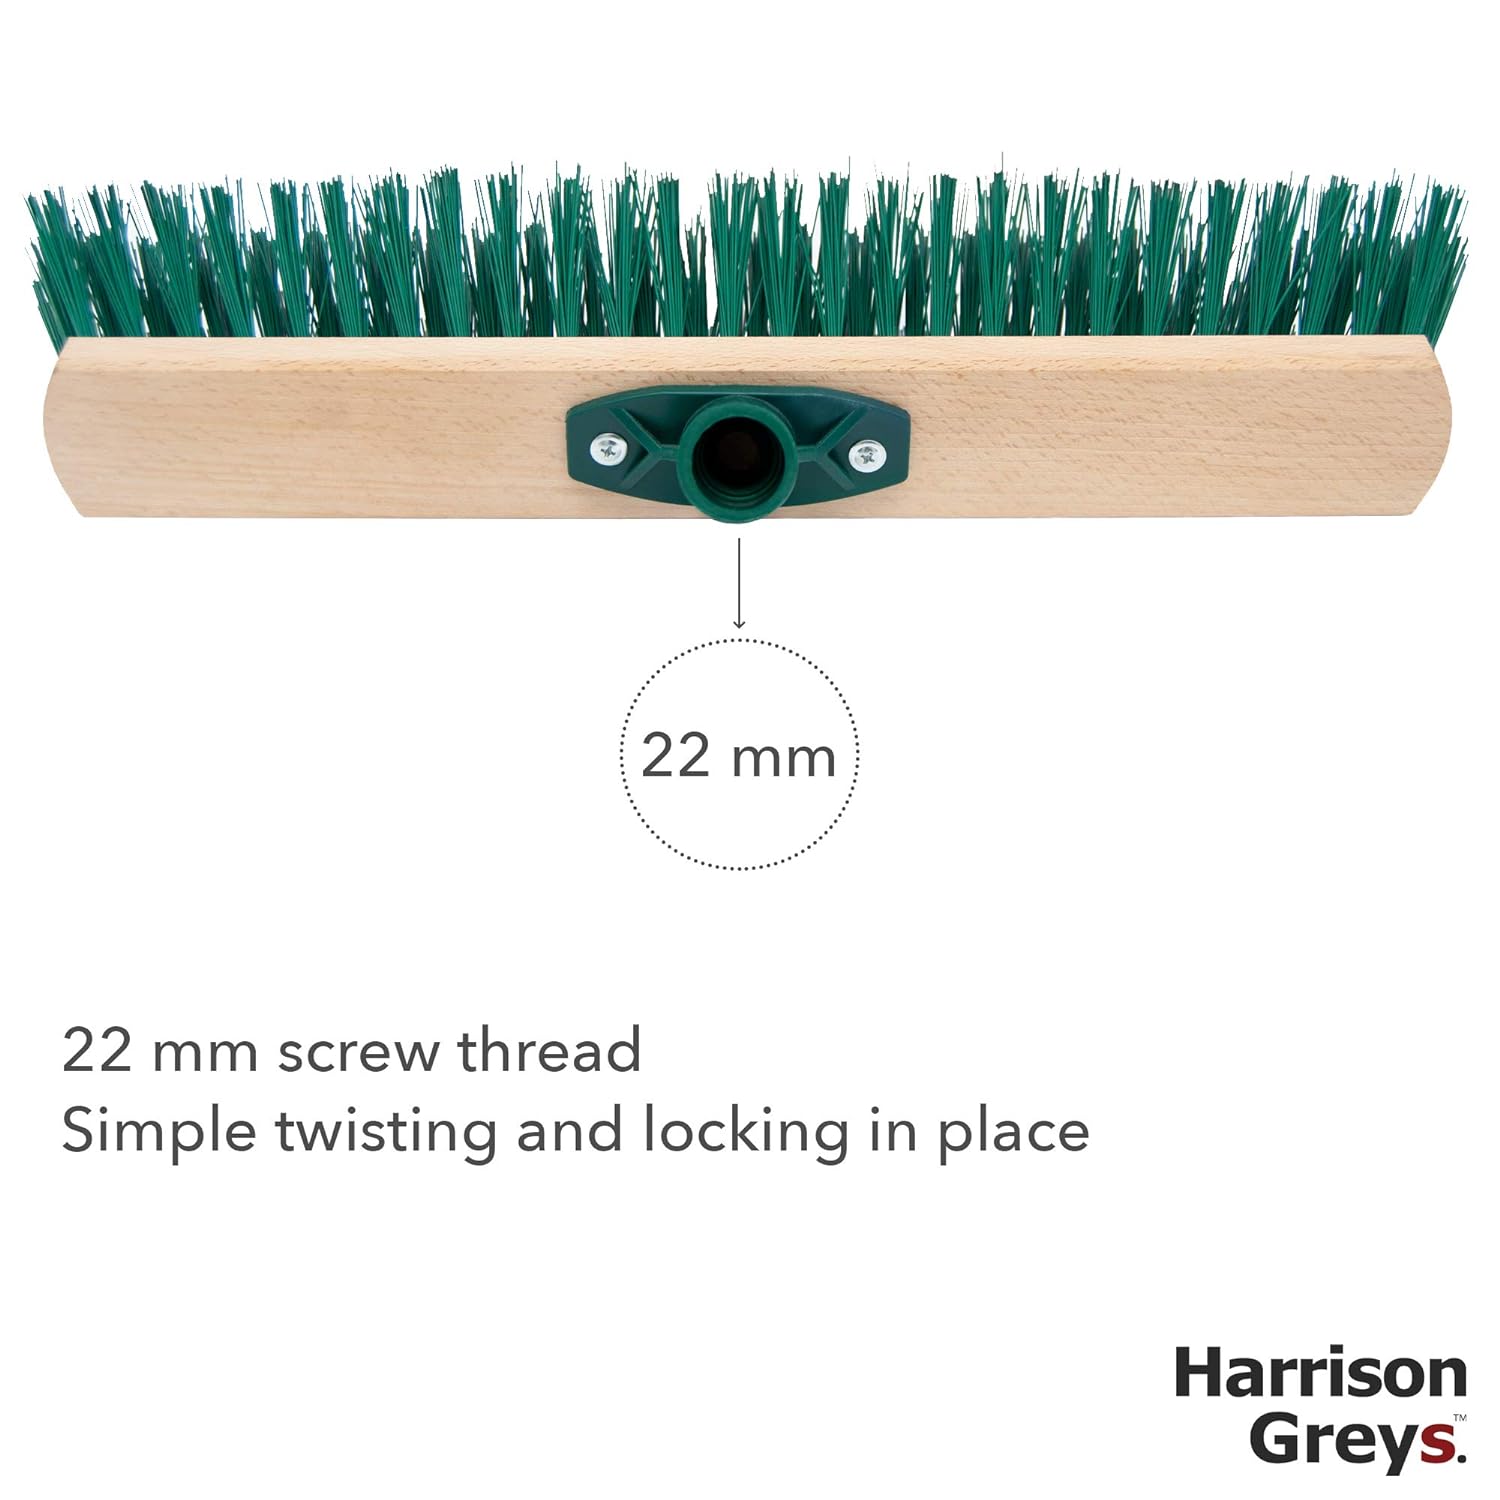 Sweeping Brush, Garden Broom Head 16" - Perfect For Yard Brushes and Outdoor Brooms, Hard Bristle Garden Brush